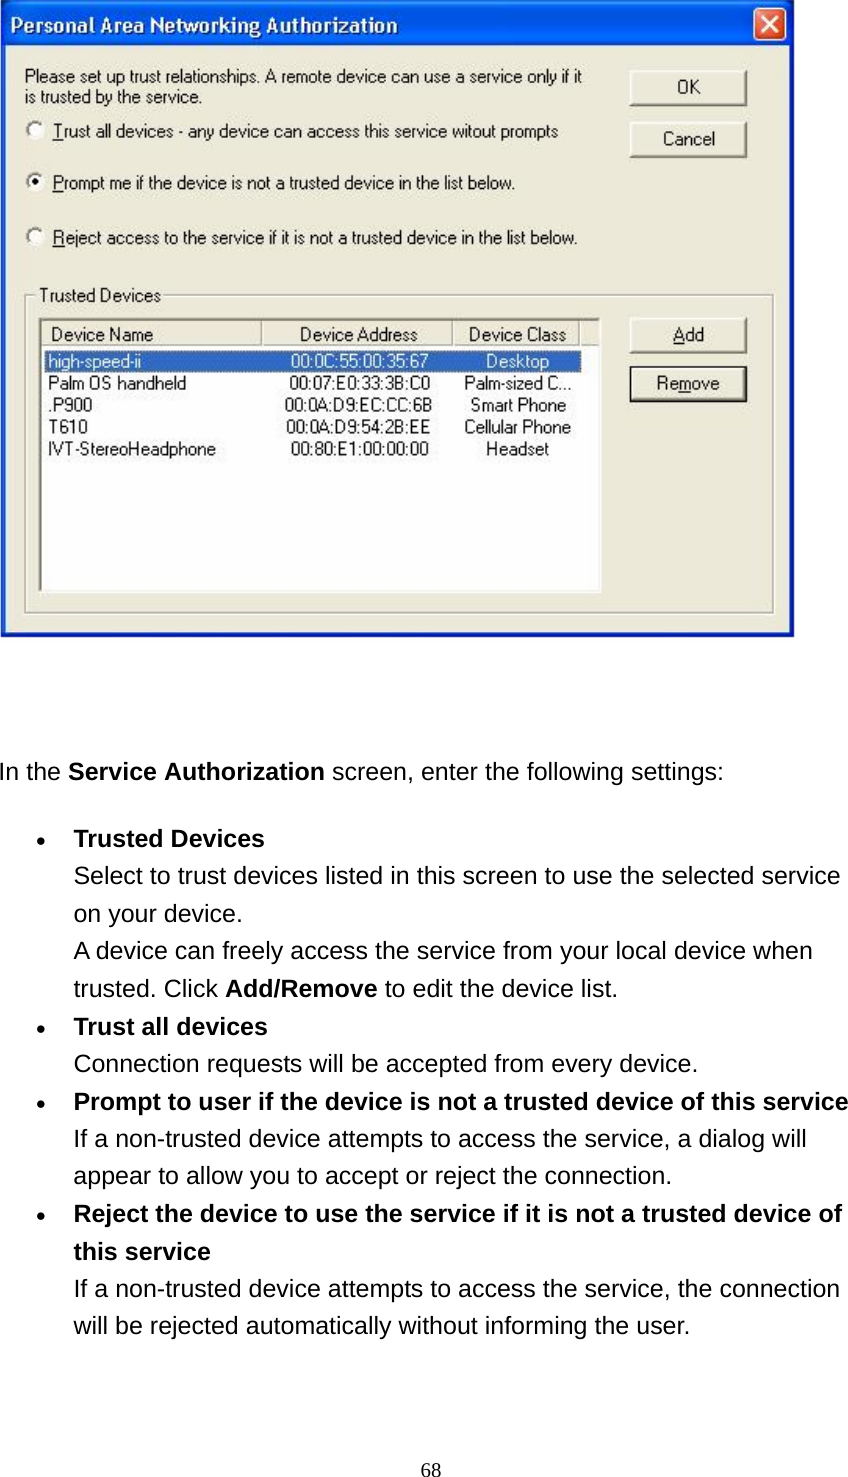   68   In the Service Authorization screen, enter the following settings: • Trusted Devices Select to trust devices listed in this screen to use the selected service on your device. A device can freely access the service from your local device when trusted. Click Add/Remove to edit the device list.   • Trust all devices Connection requests will be accepted from every device.   • Prompt to user if the device is not a trusted device of this service If a non-trusted device attempts to access the service, a dialog will appear to allow you to accept or reject the connection.   • Reject the device to use the service if it is not a trusted device of this service If a non-trusted device attempts to access the service, the connection will be rejected automatically without informing the user.   